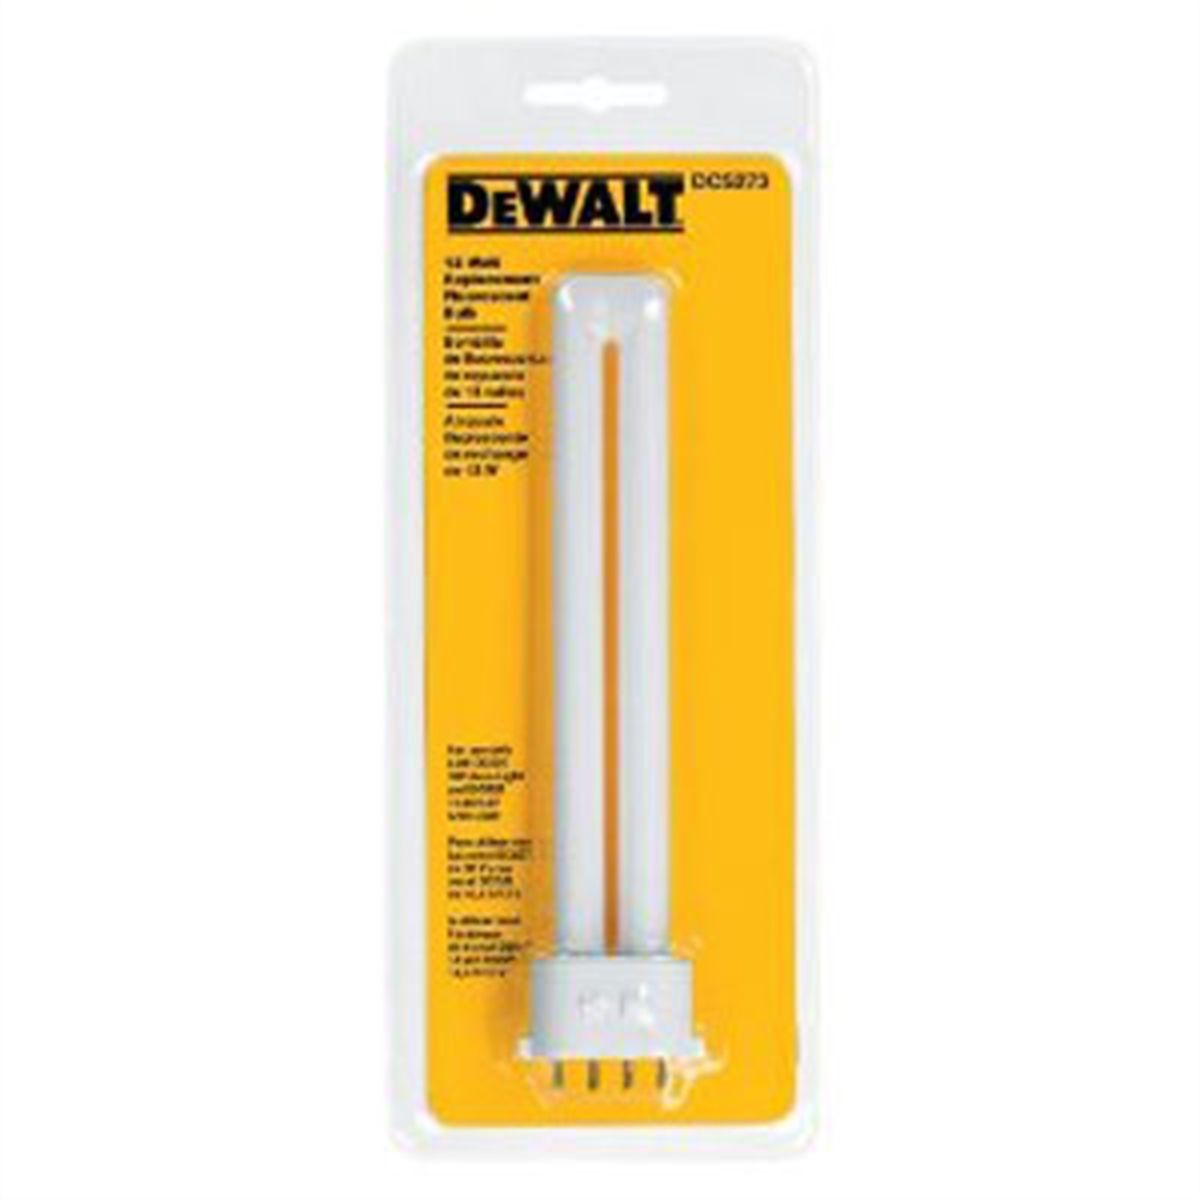 13 Watt Fluorescent Replacement Bulb for DC527 and DC528